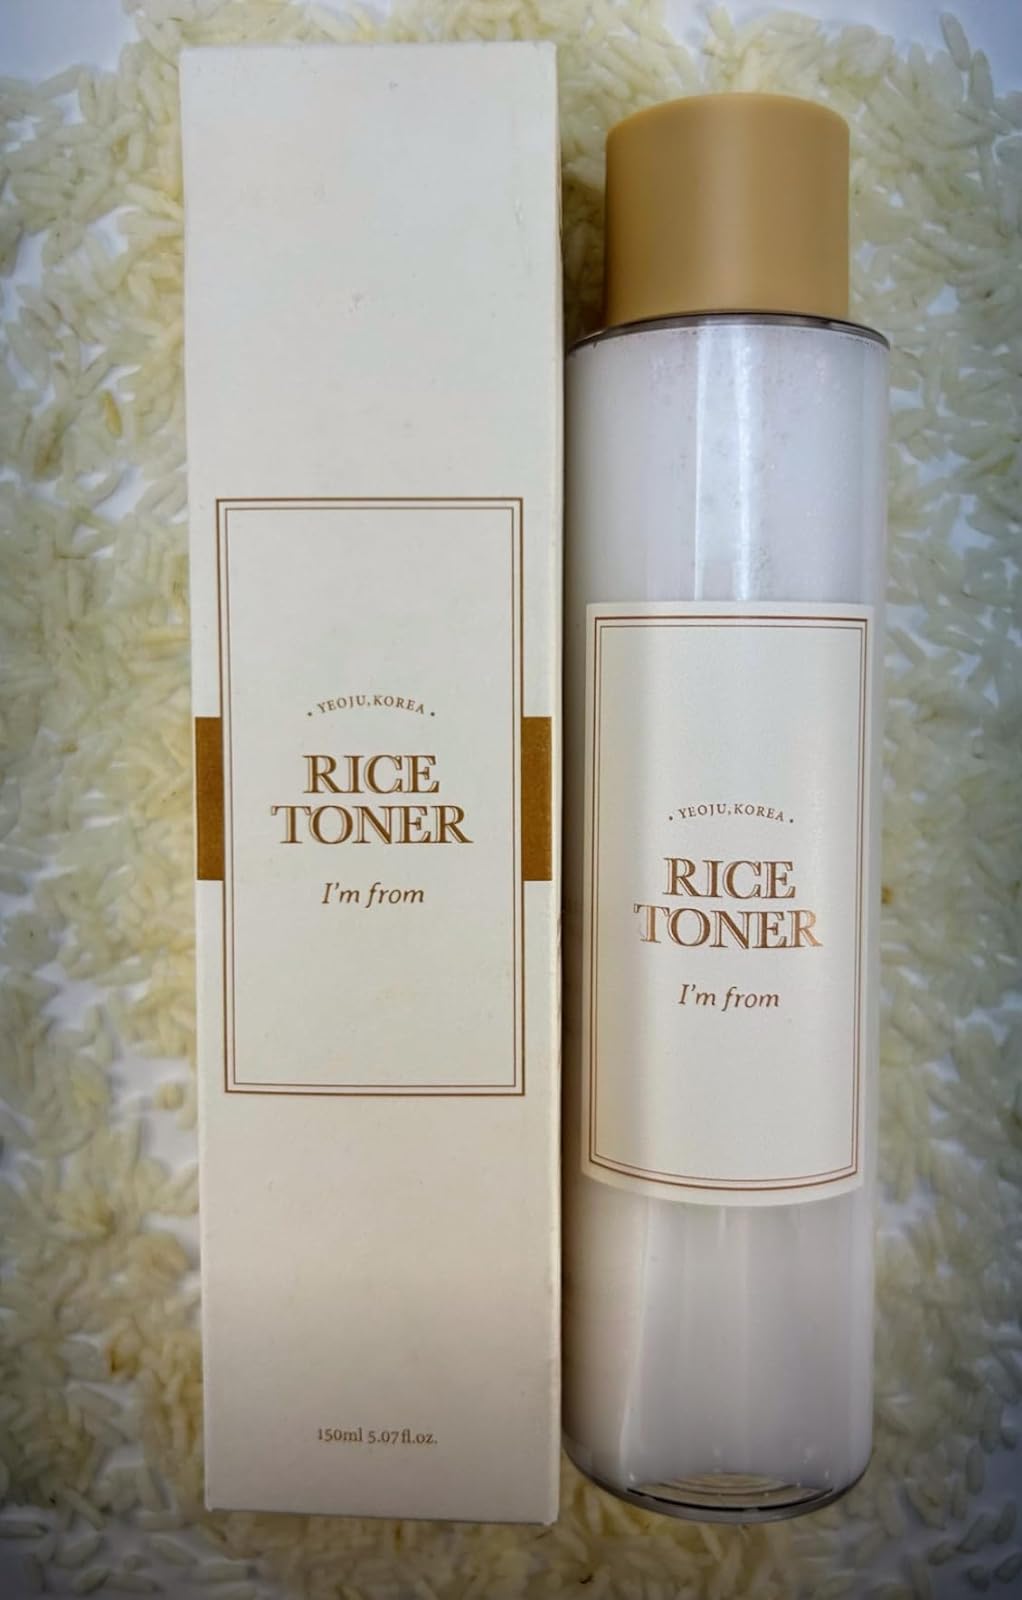  I'm From Rice Toner, 77.78% Rice Extract from Korea, Glow  Essence with Niacinamide, Hydrating for Dry Skin, Vegan, Alcohol Free,  Fragrance Free, Peta Approved, K Beauty Toner, 5.07 Fl Oz